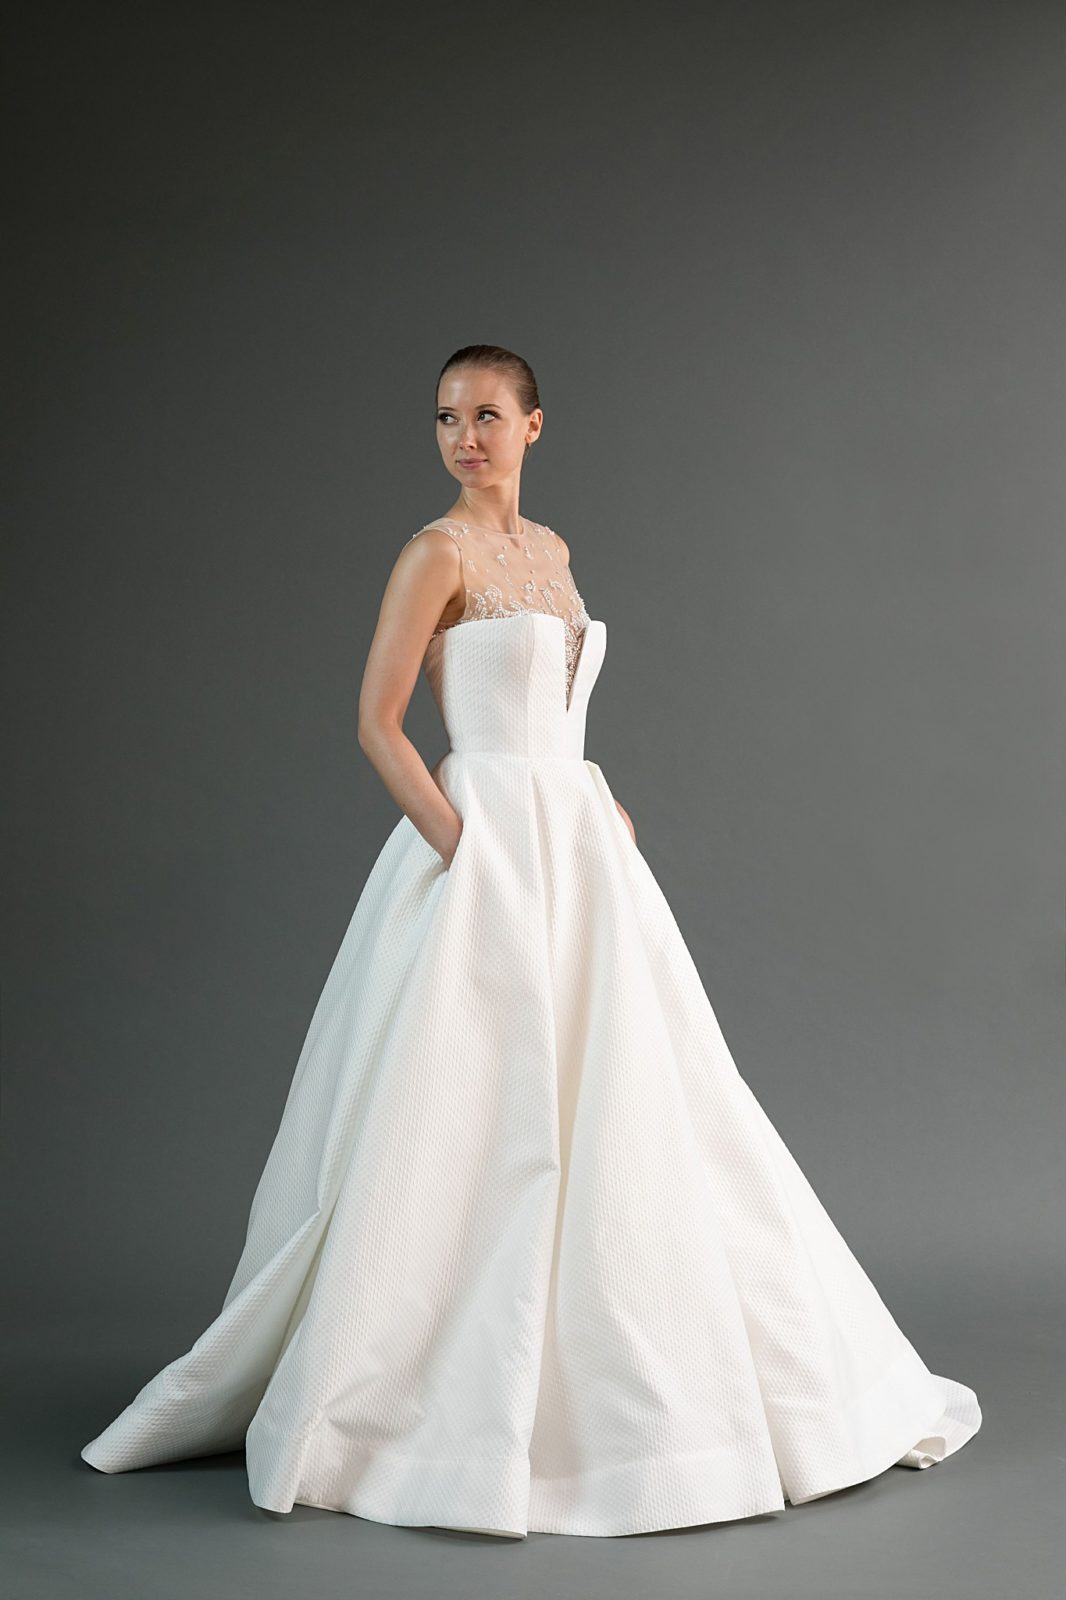 Kei is a textured wedding dress with pockets and an illusion neckline